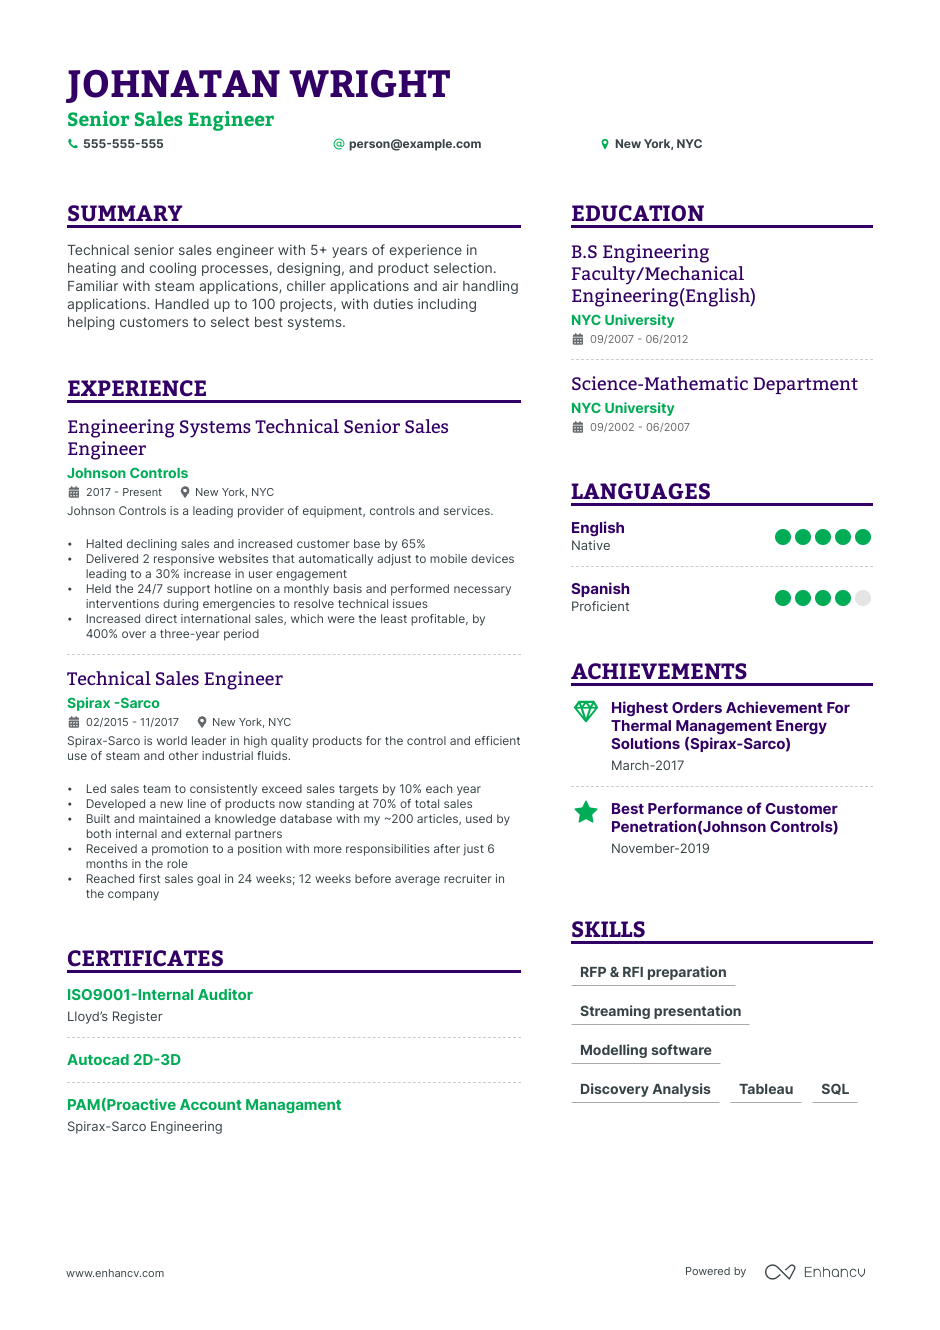 2 Sales Engineer Resume Examples & Guide for 2023